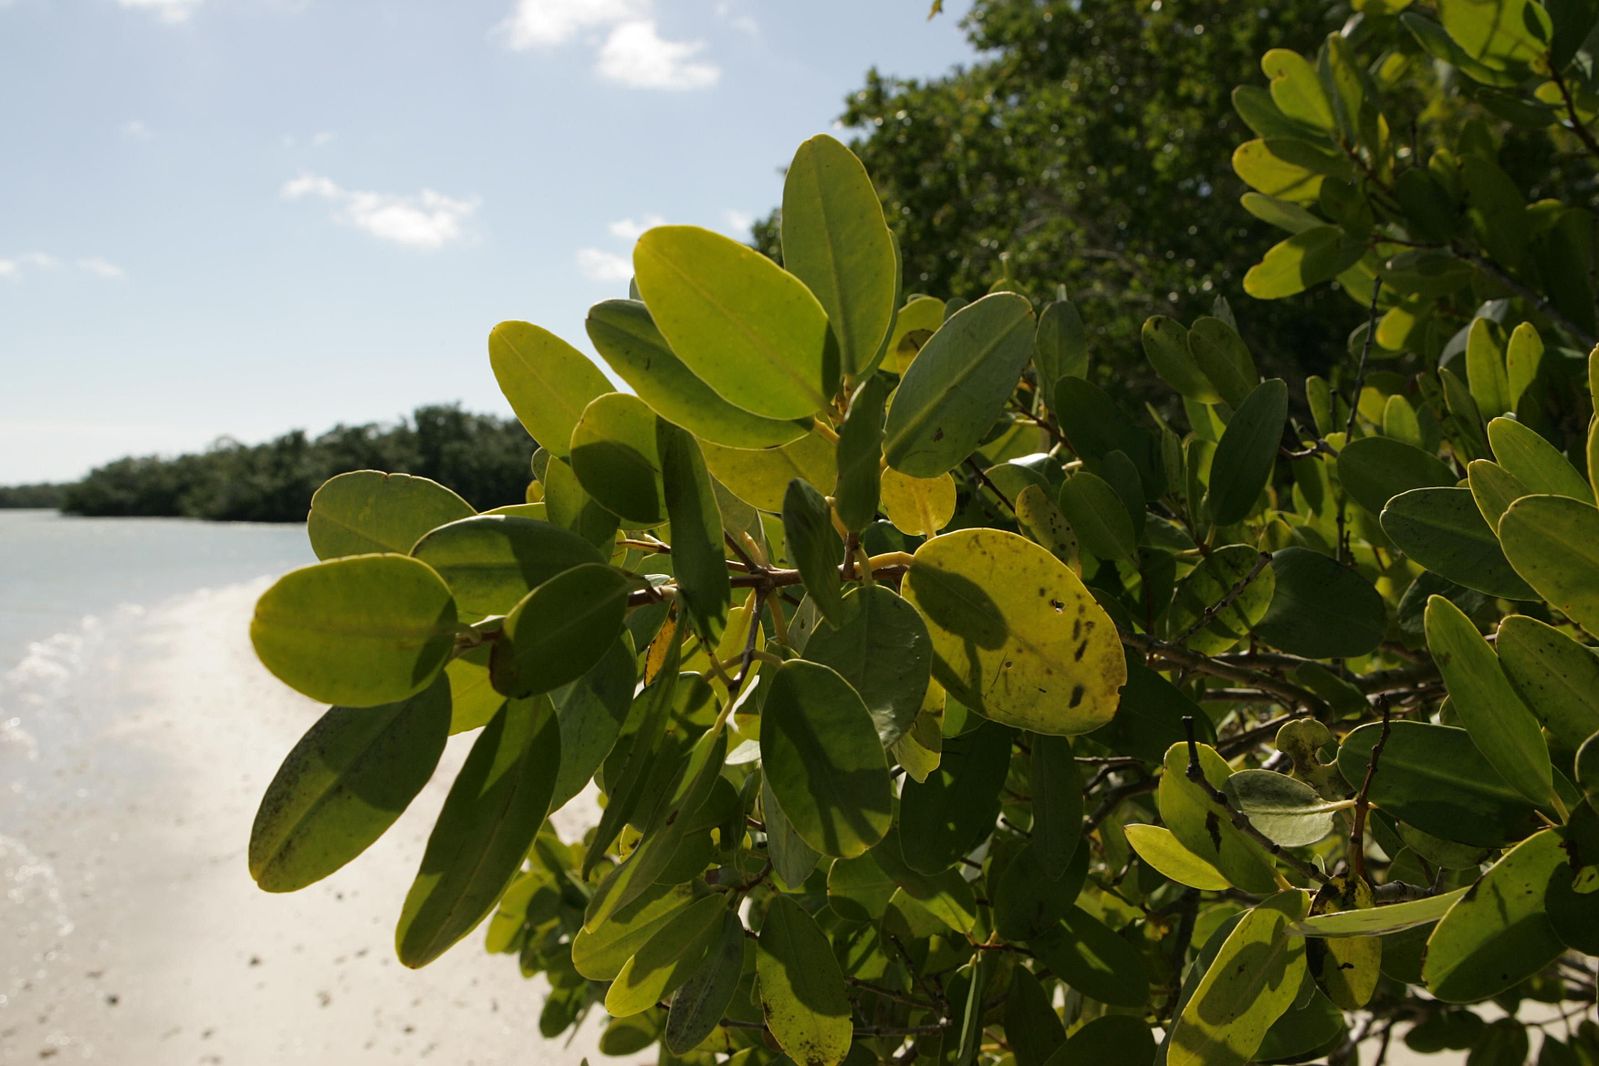 Close up view of red mangrove leaves.